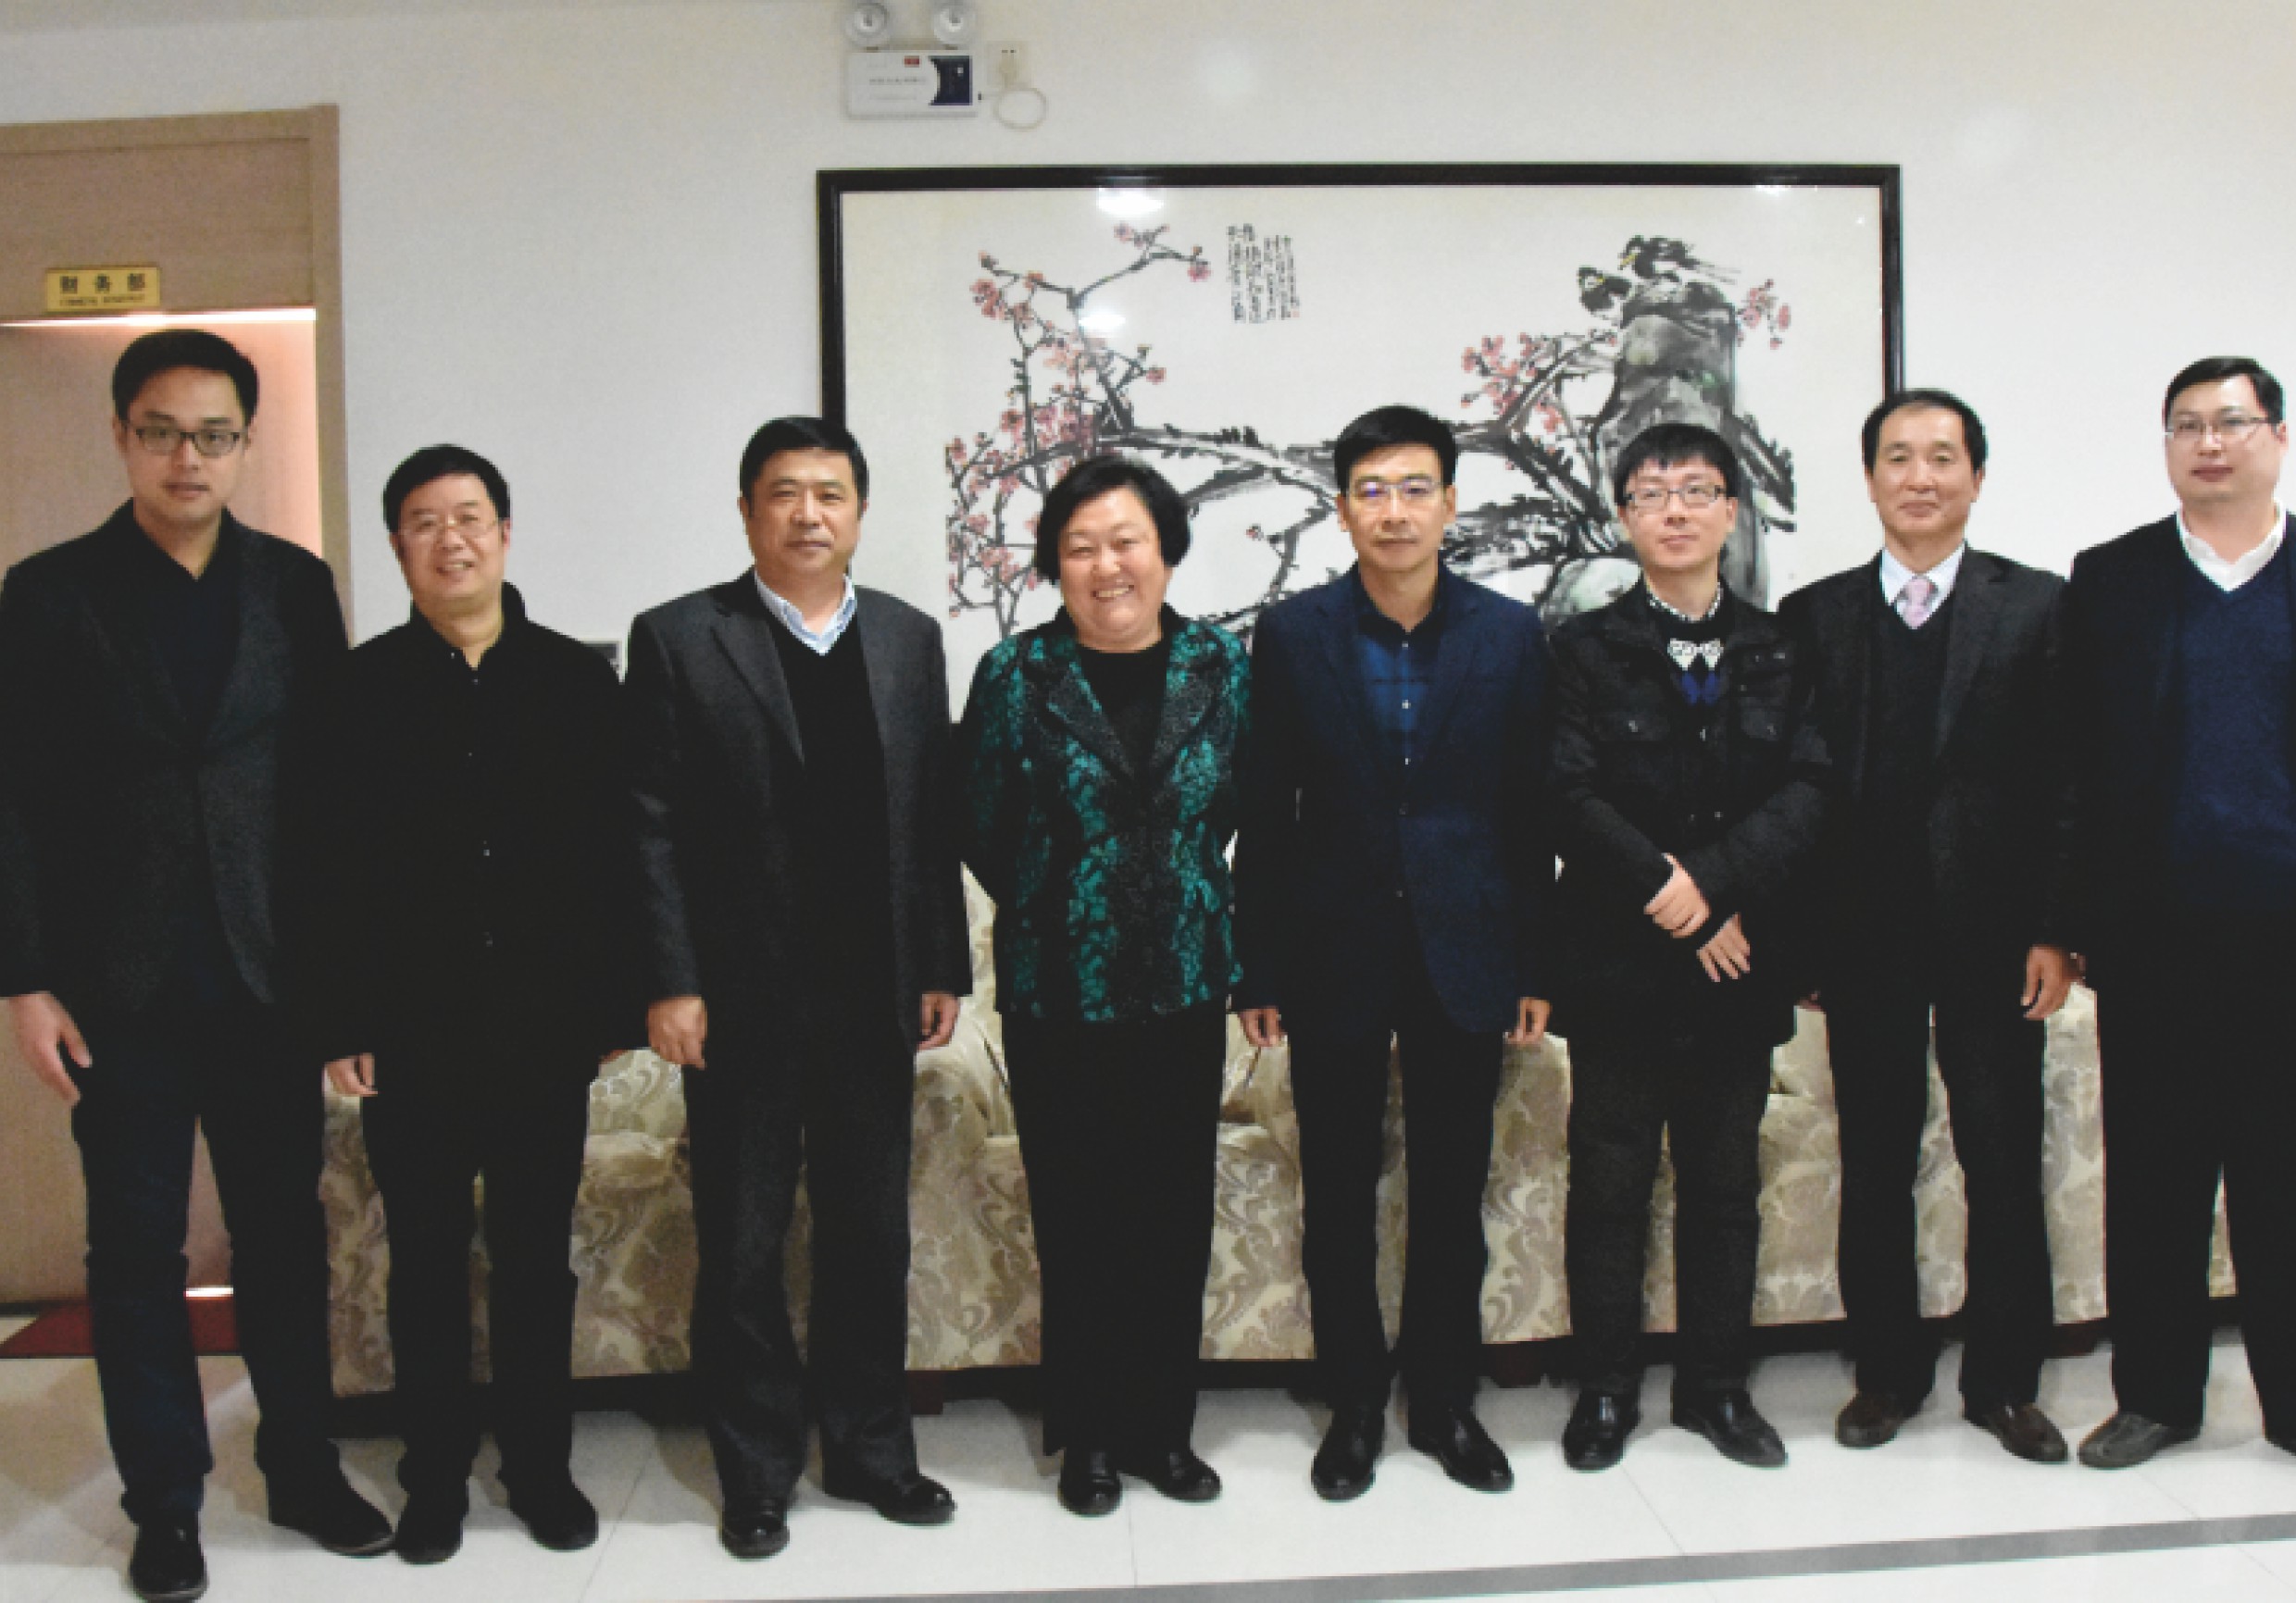 Zhao Baige, Deputy Director of the Foreign Affairs Committee of the National People's Congress, came to the company for research